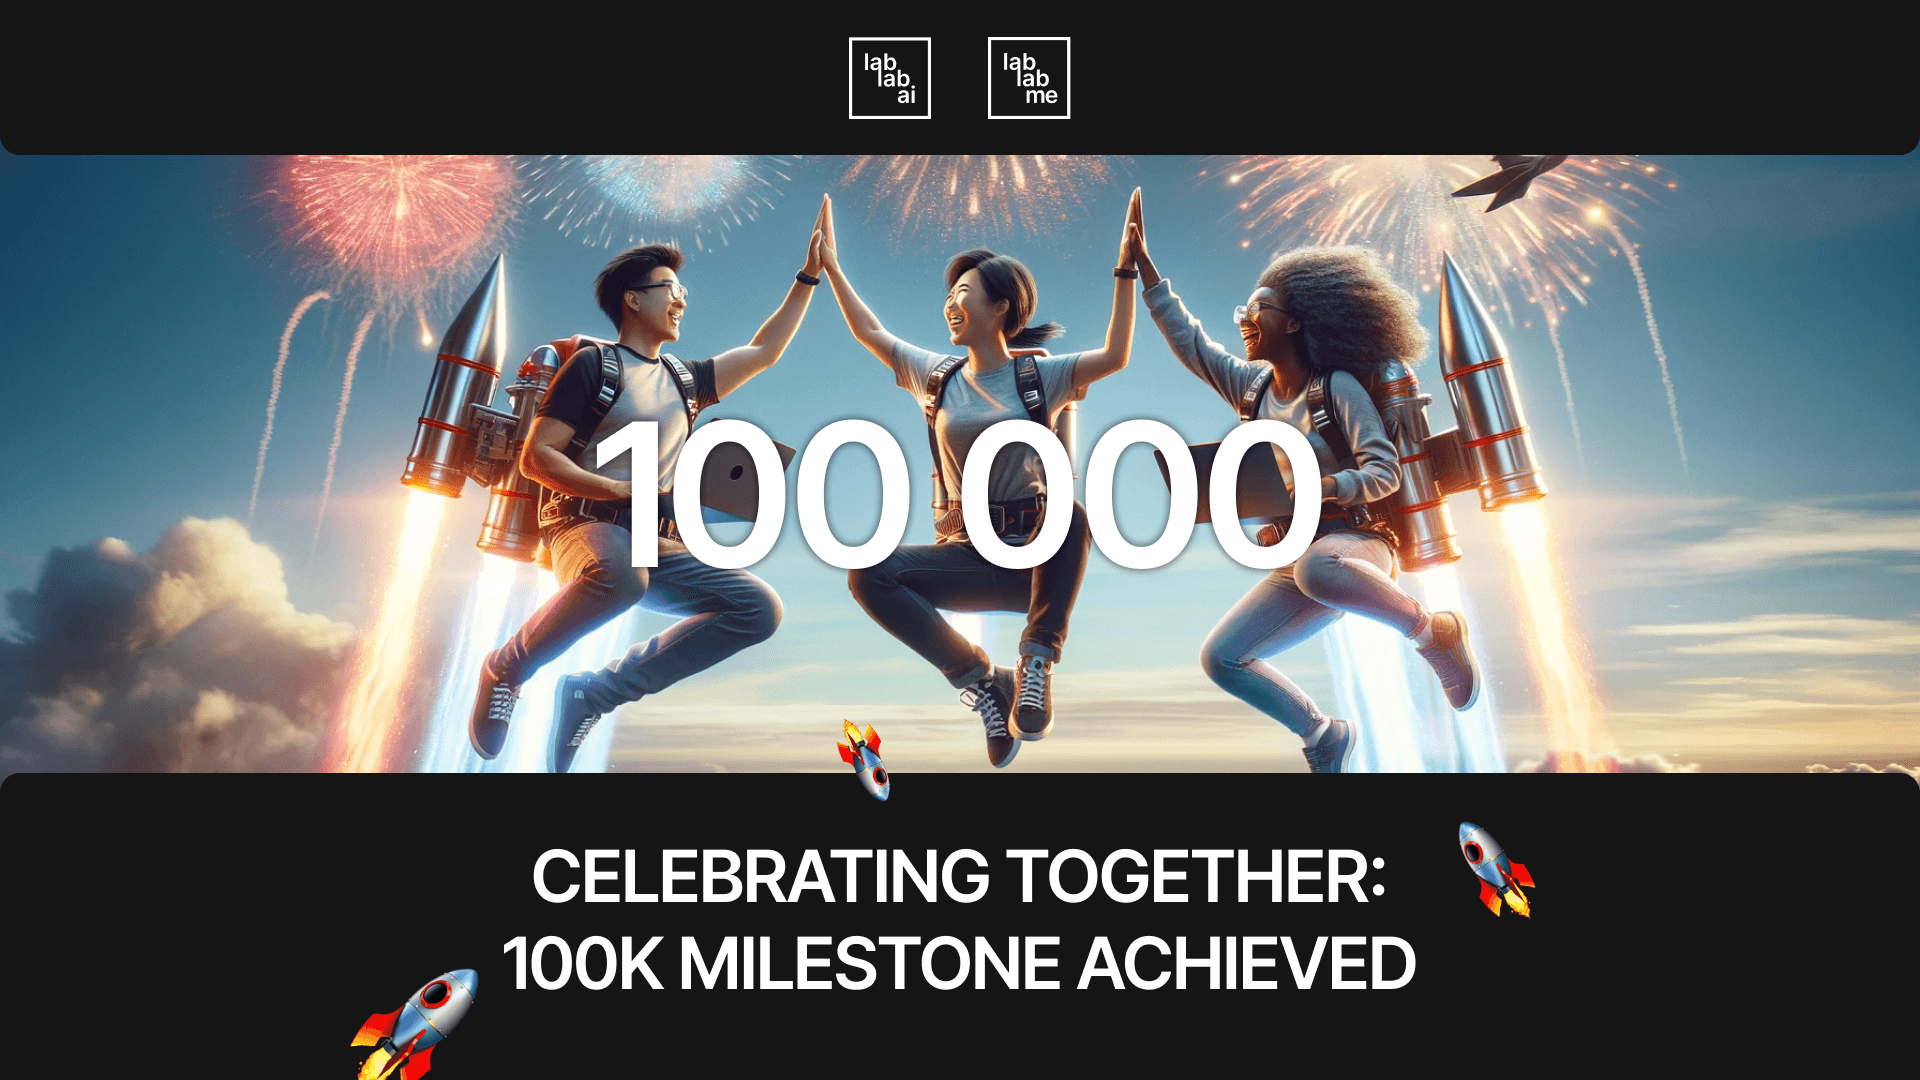 Wow - We've Reached 100,000 lablab.ai Community Members!